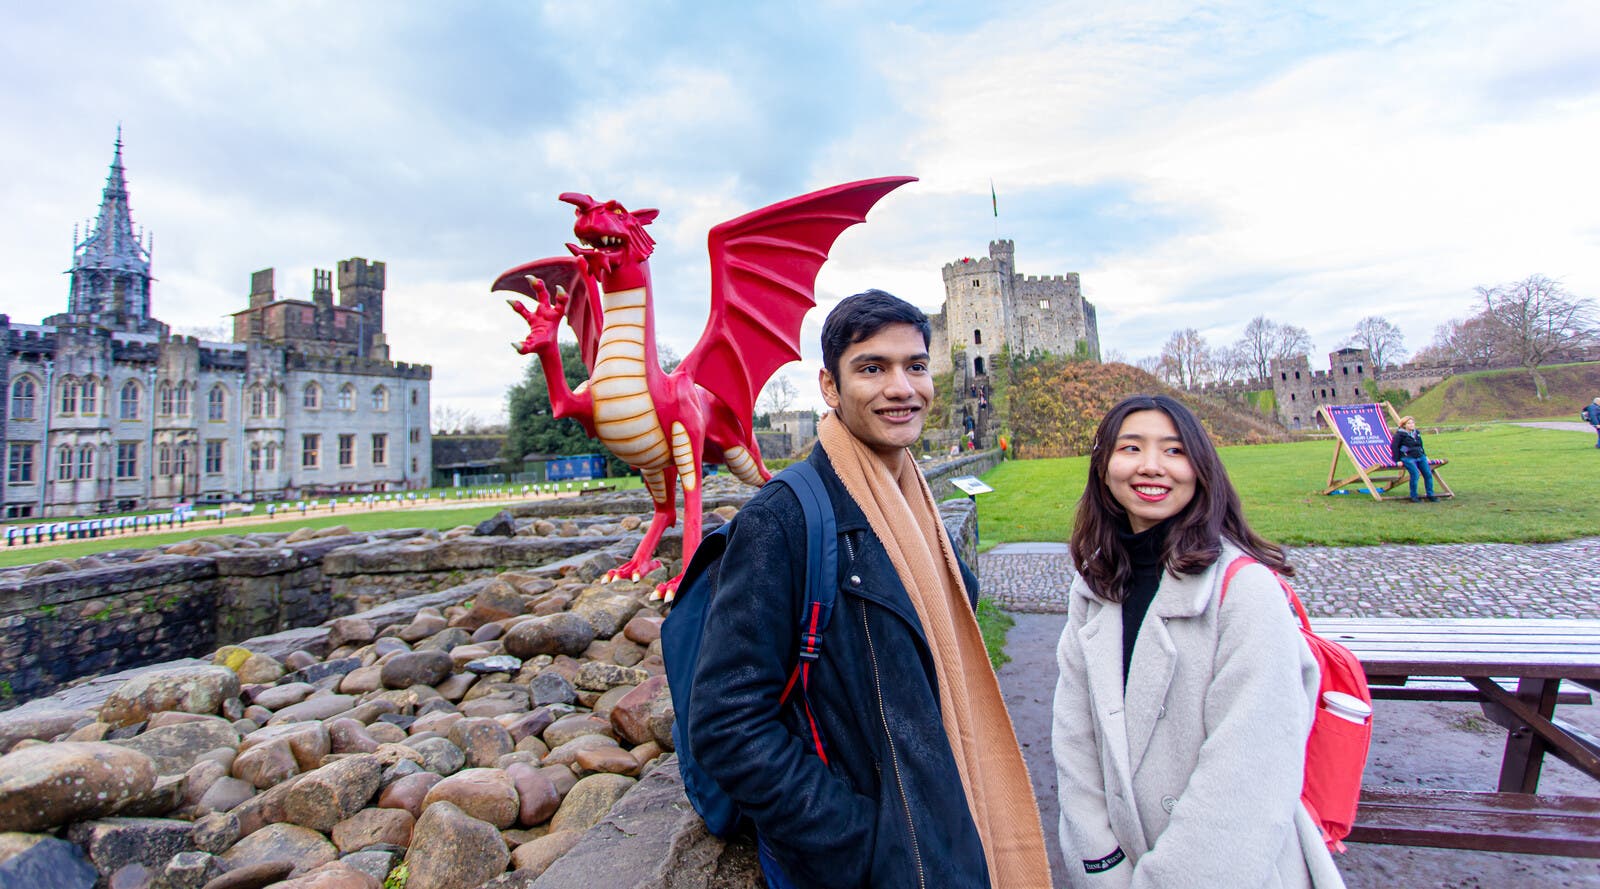 Students smiling in front of model dragon and castle